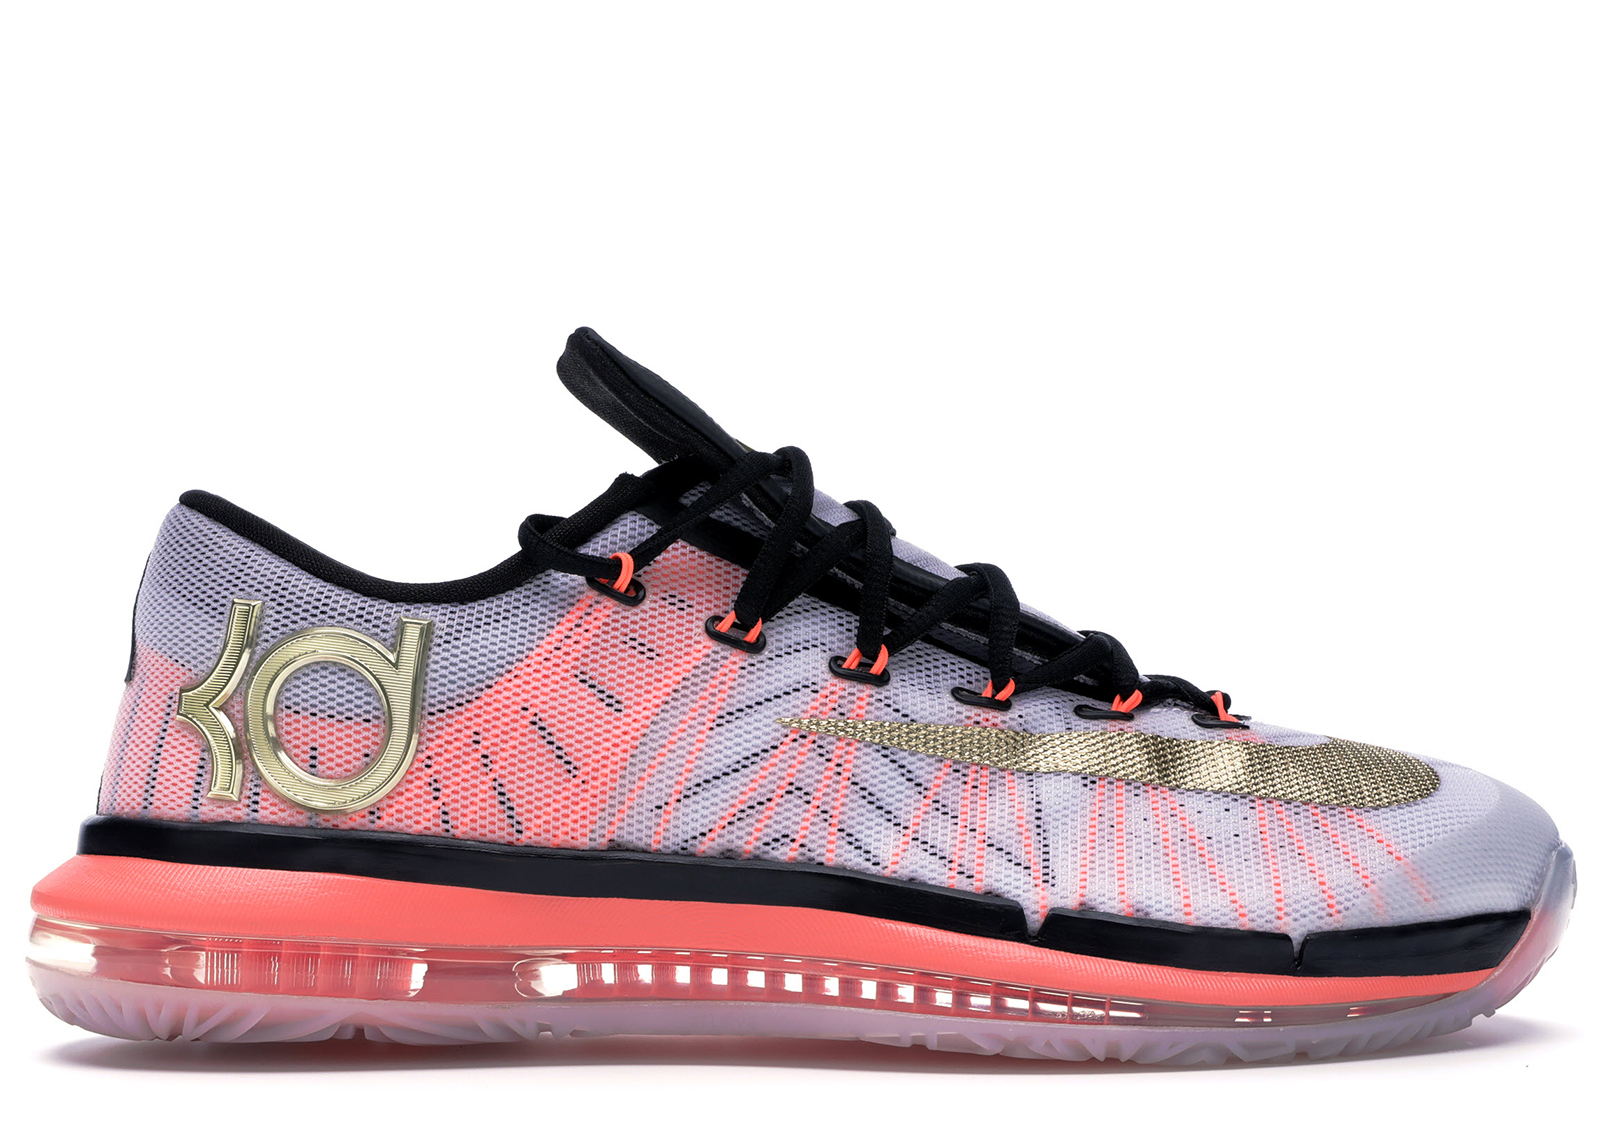 kd 6 shoes for sale